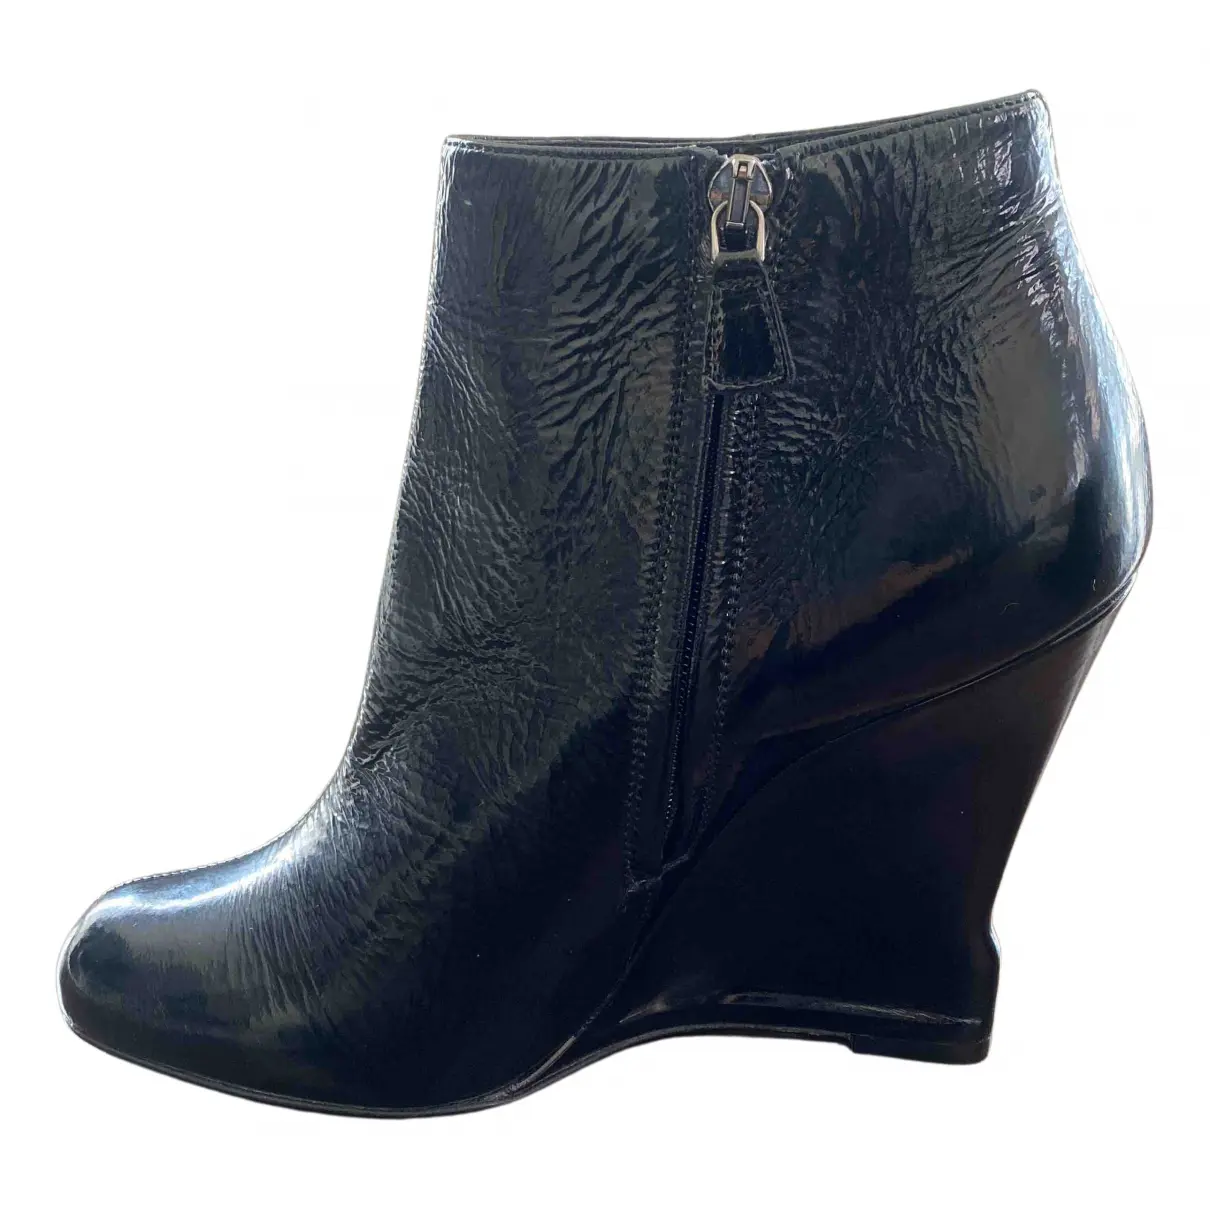 Patent leather ankle boots Lanvin